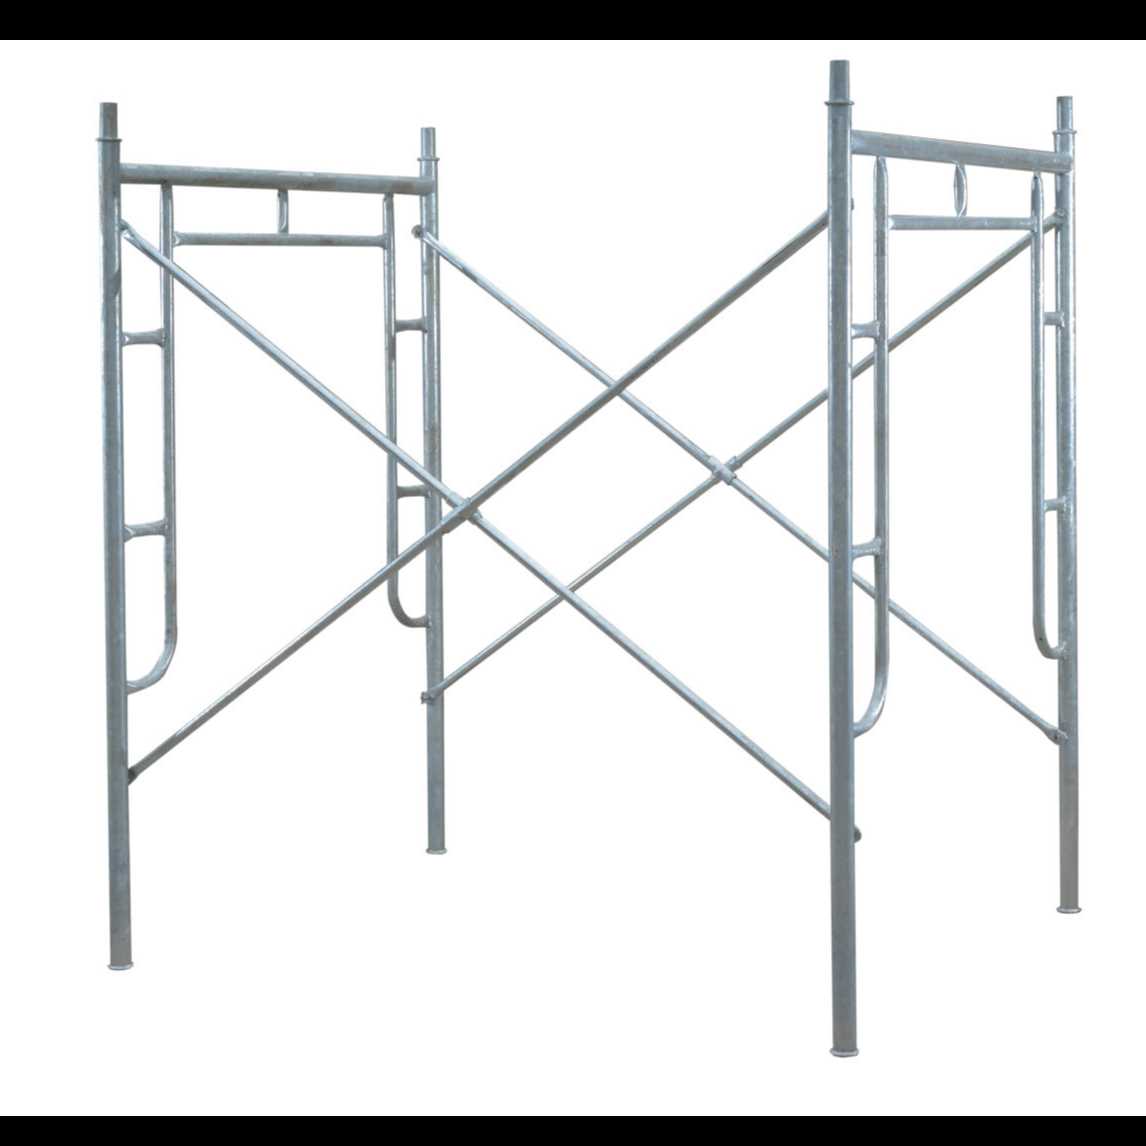 I want to buy scaffolding 